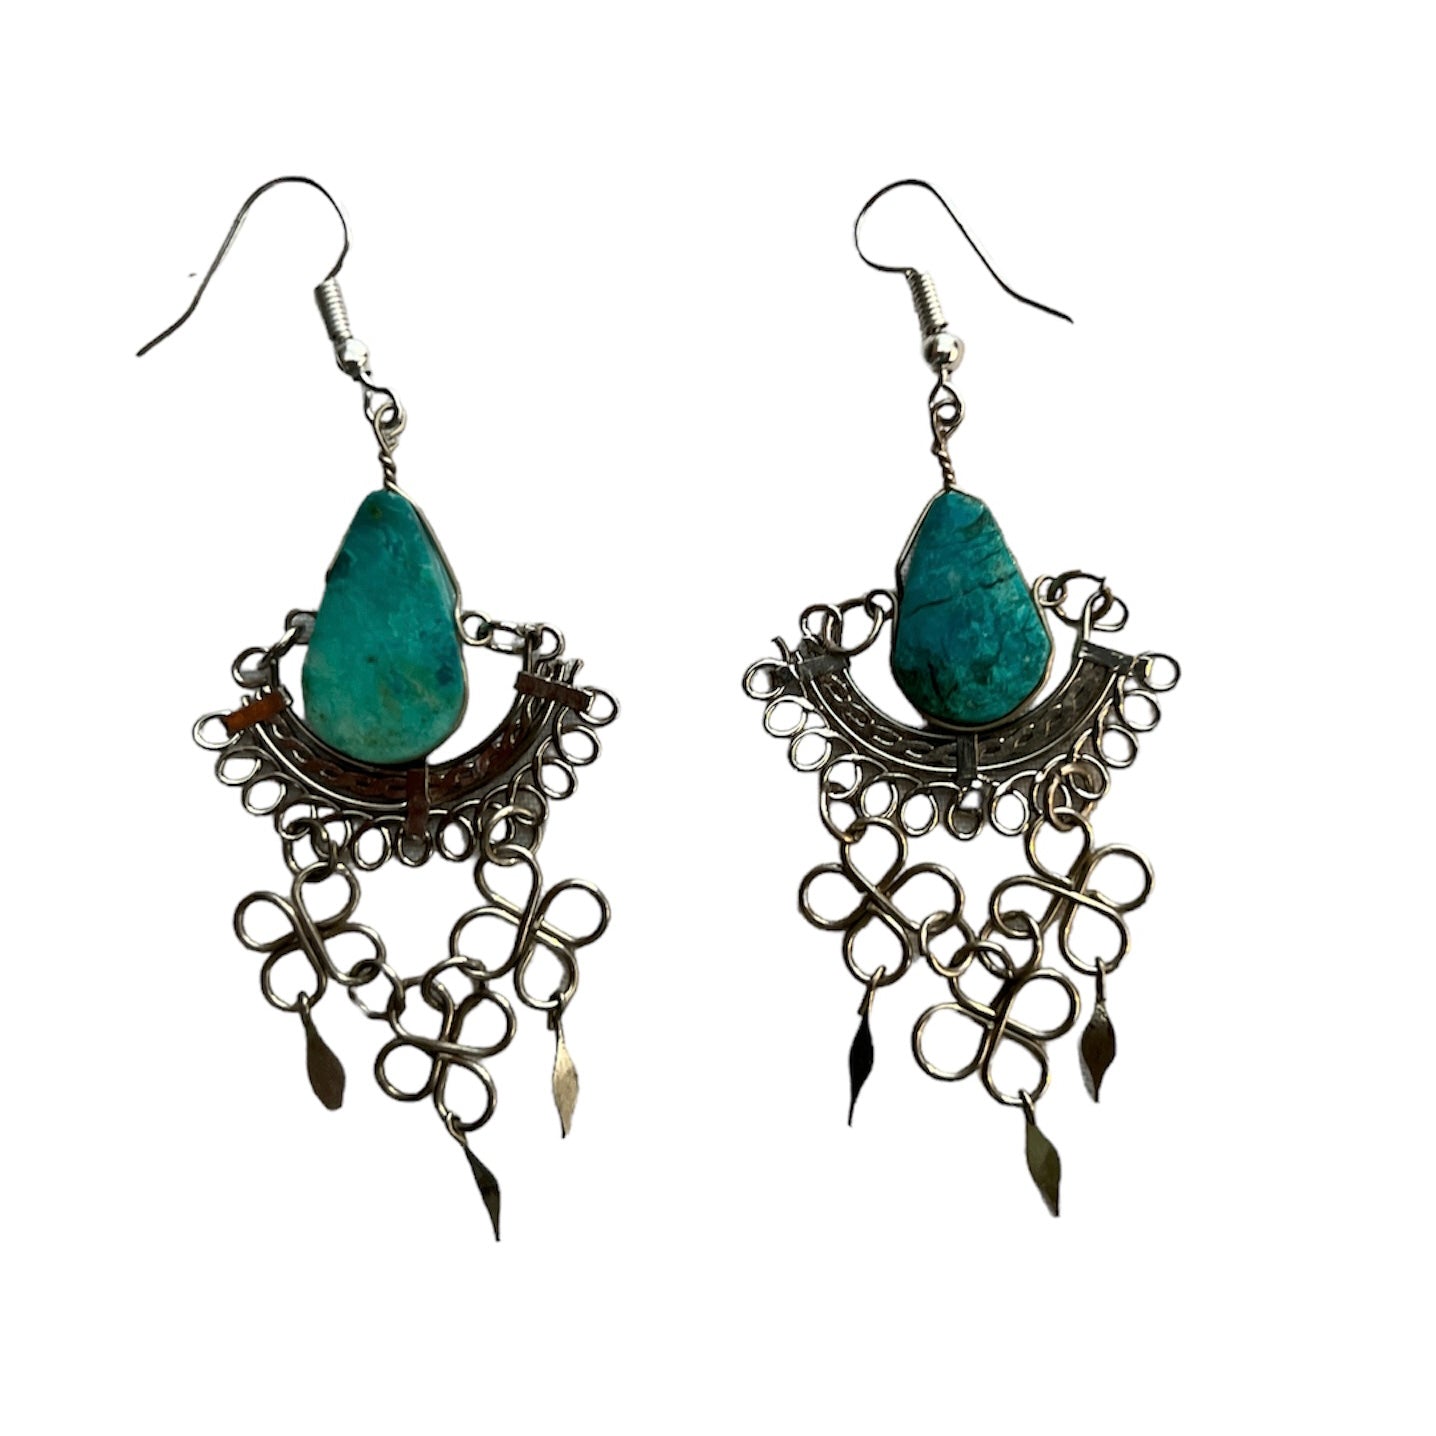 Silver Wire and Peruvian Turquoise - Made by Peruvian Amazon Artisan